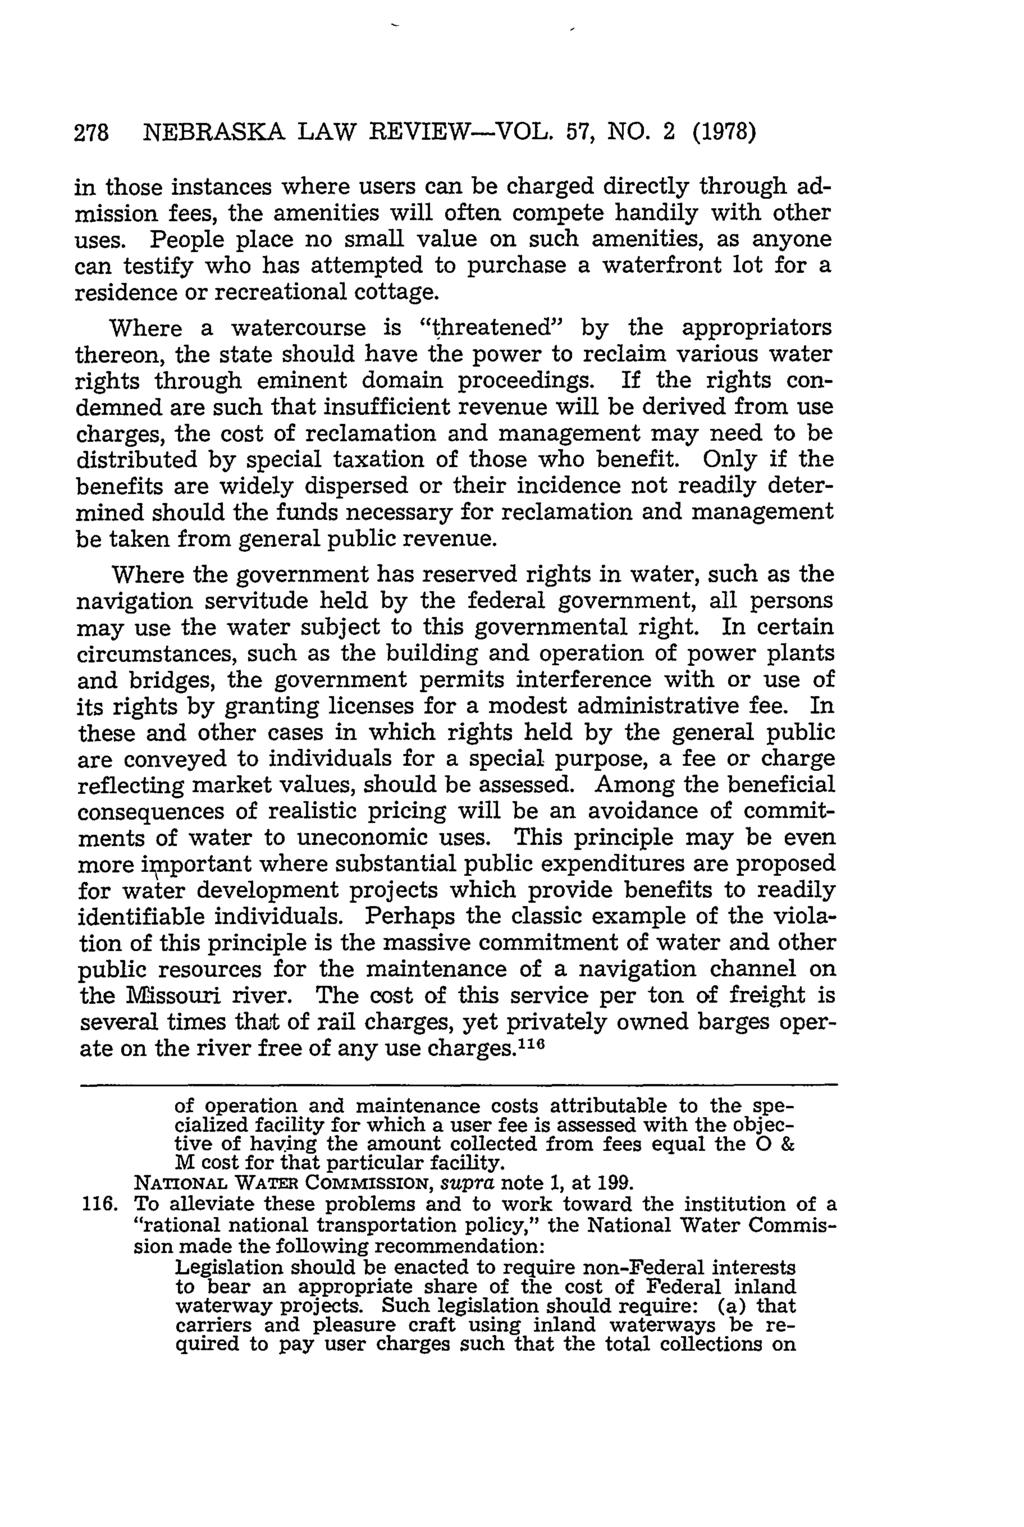 278 NEBRASKA LAW REVIEW-VOL. 57, NO. 2 (1978) in those instances where users can be charged directly through admission fees, the amenities will often compete handily with other uses.